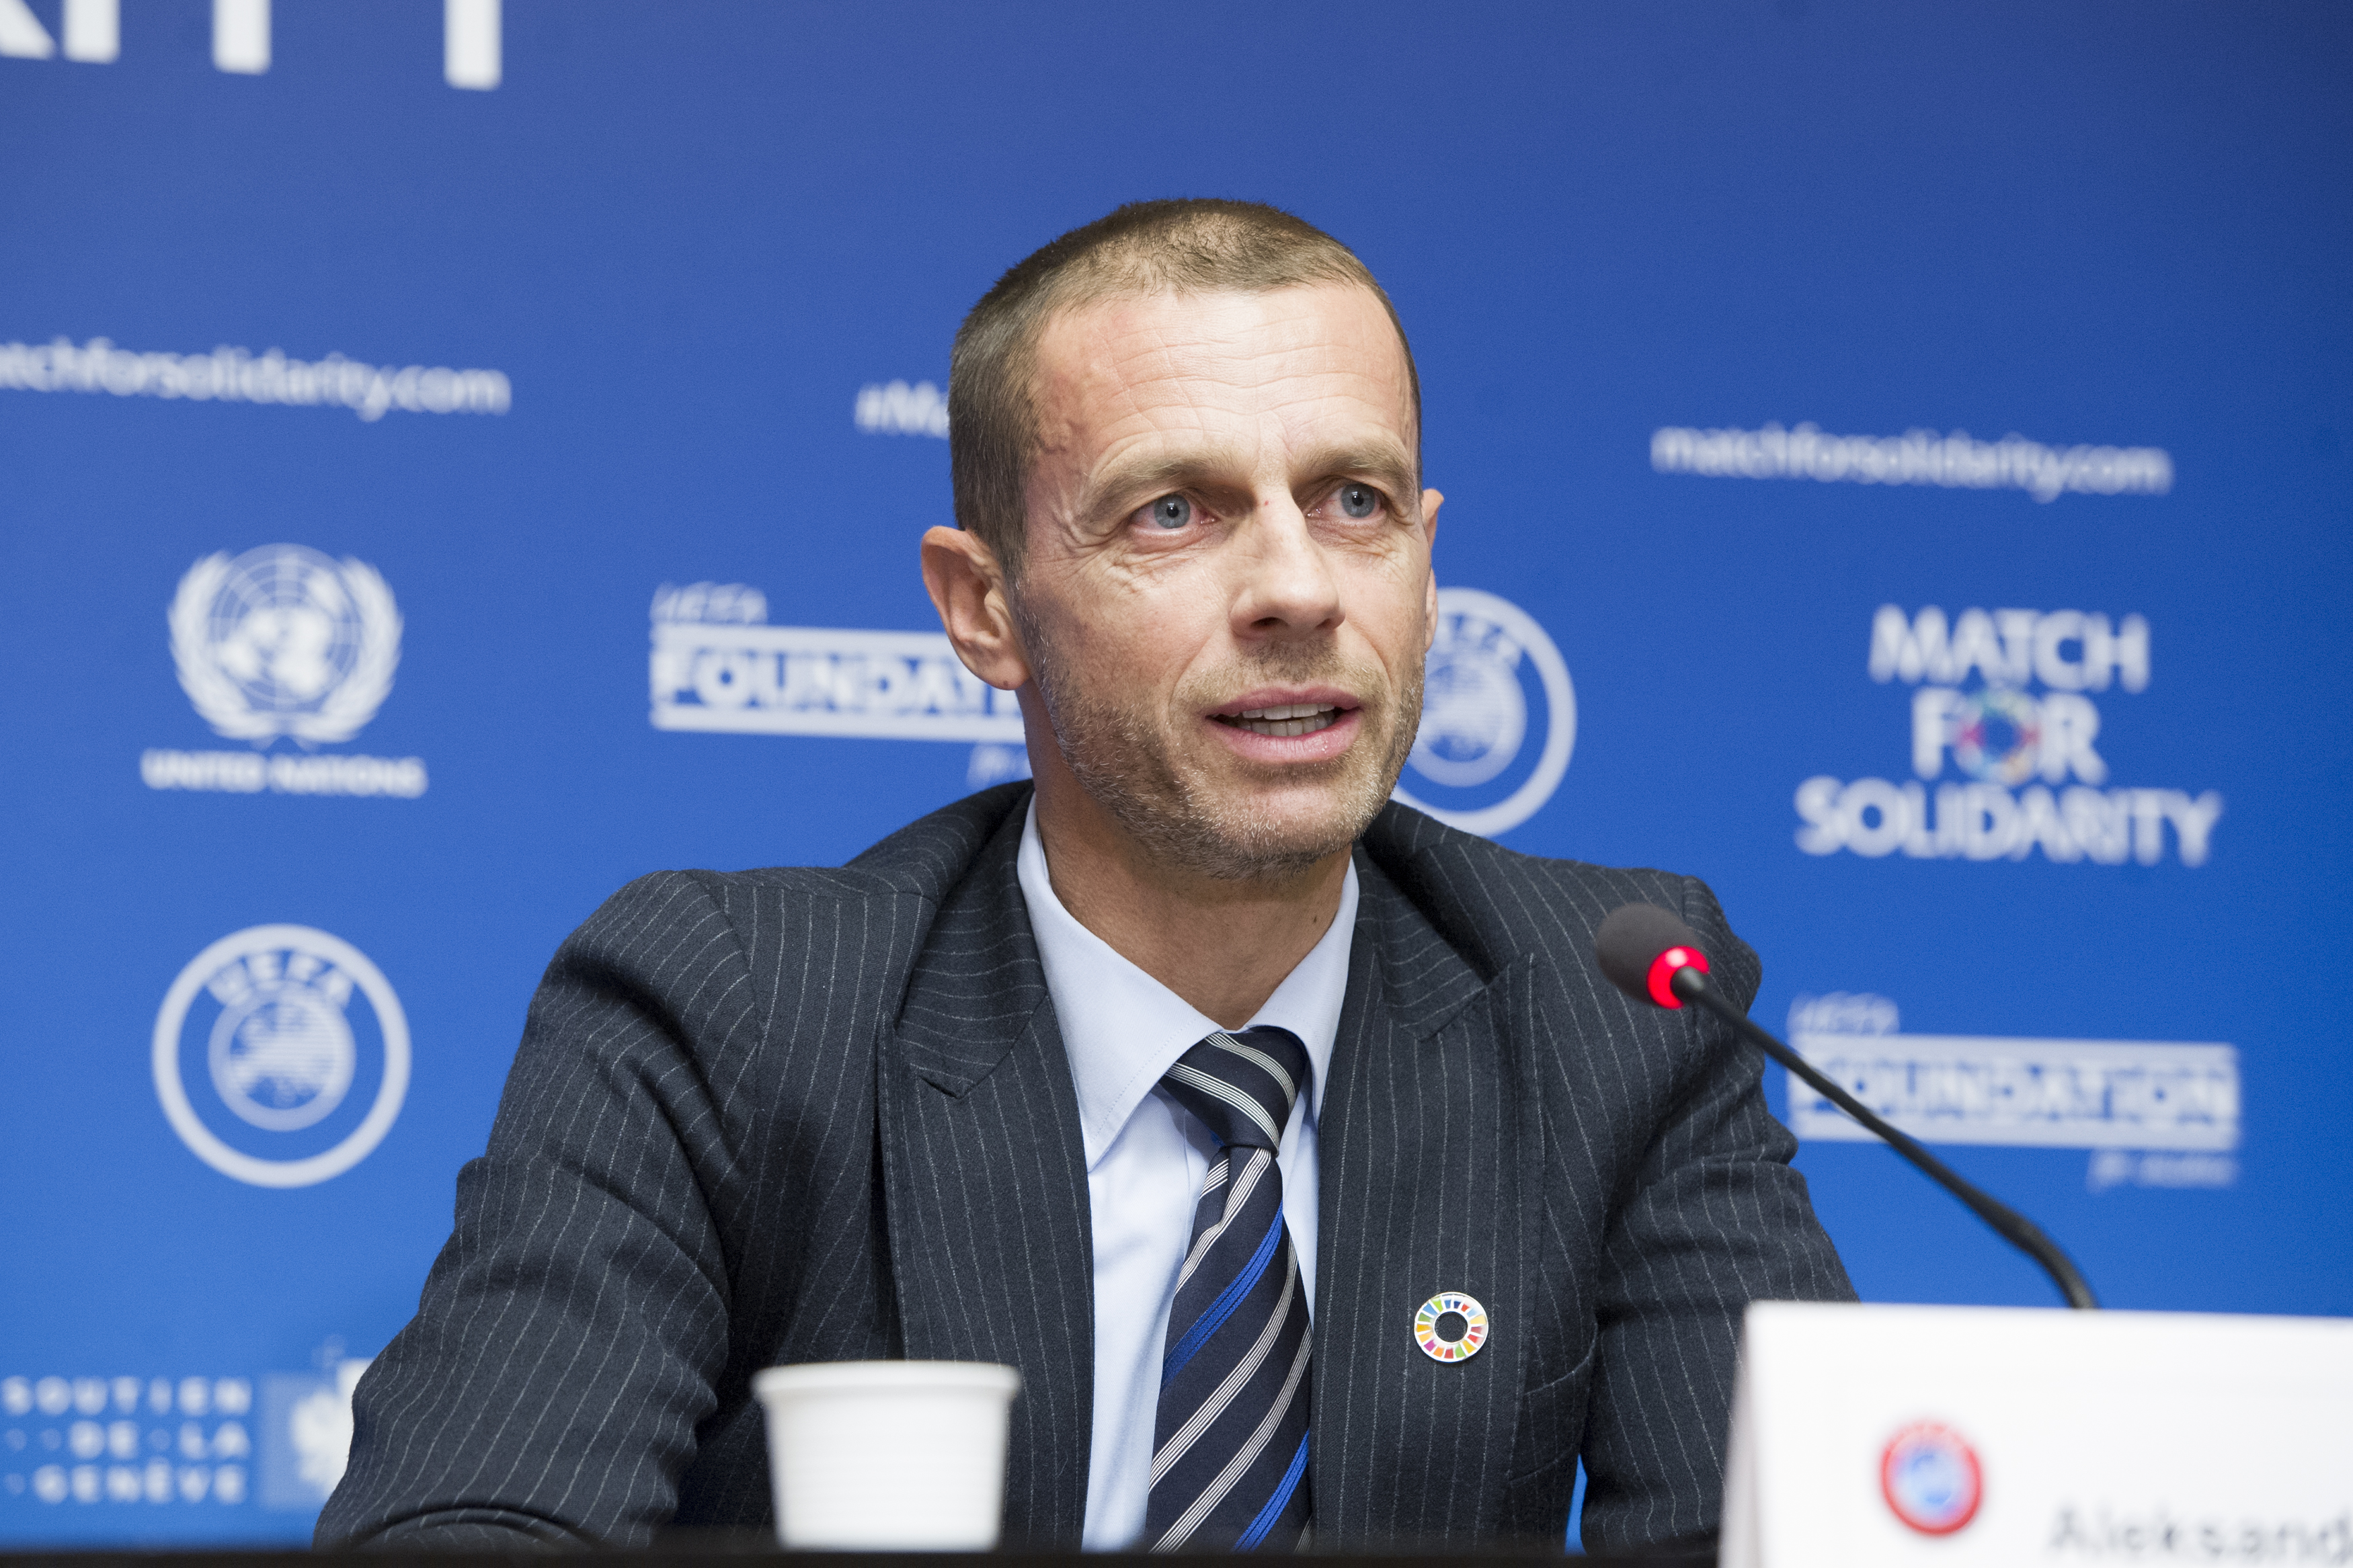 Aleksander Ceferin, UEFA President, briefs the press about the Match for Solidarity 2018 in the UN Palais des Nations on February 13, 2018